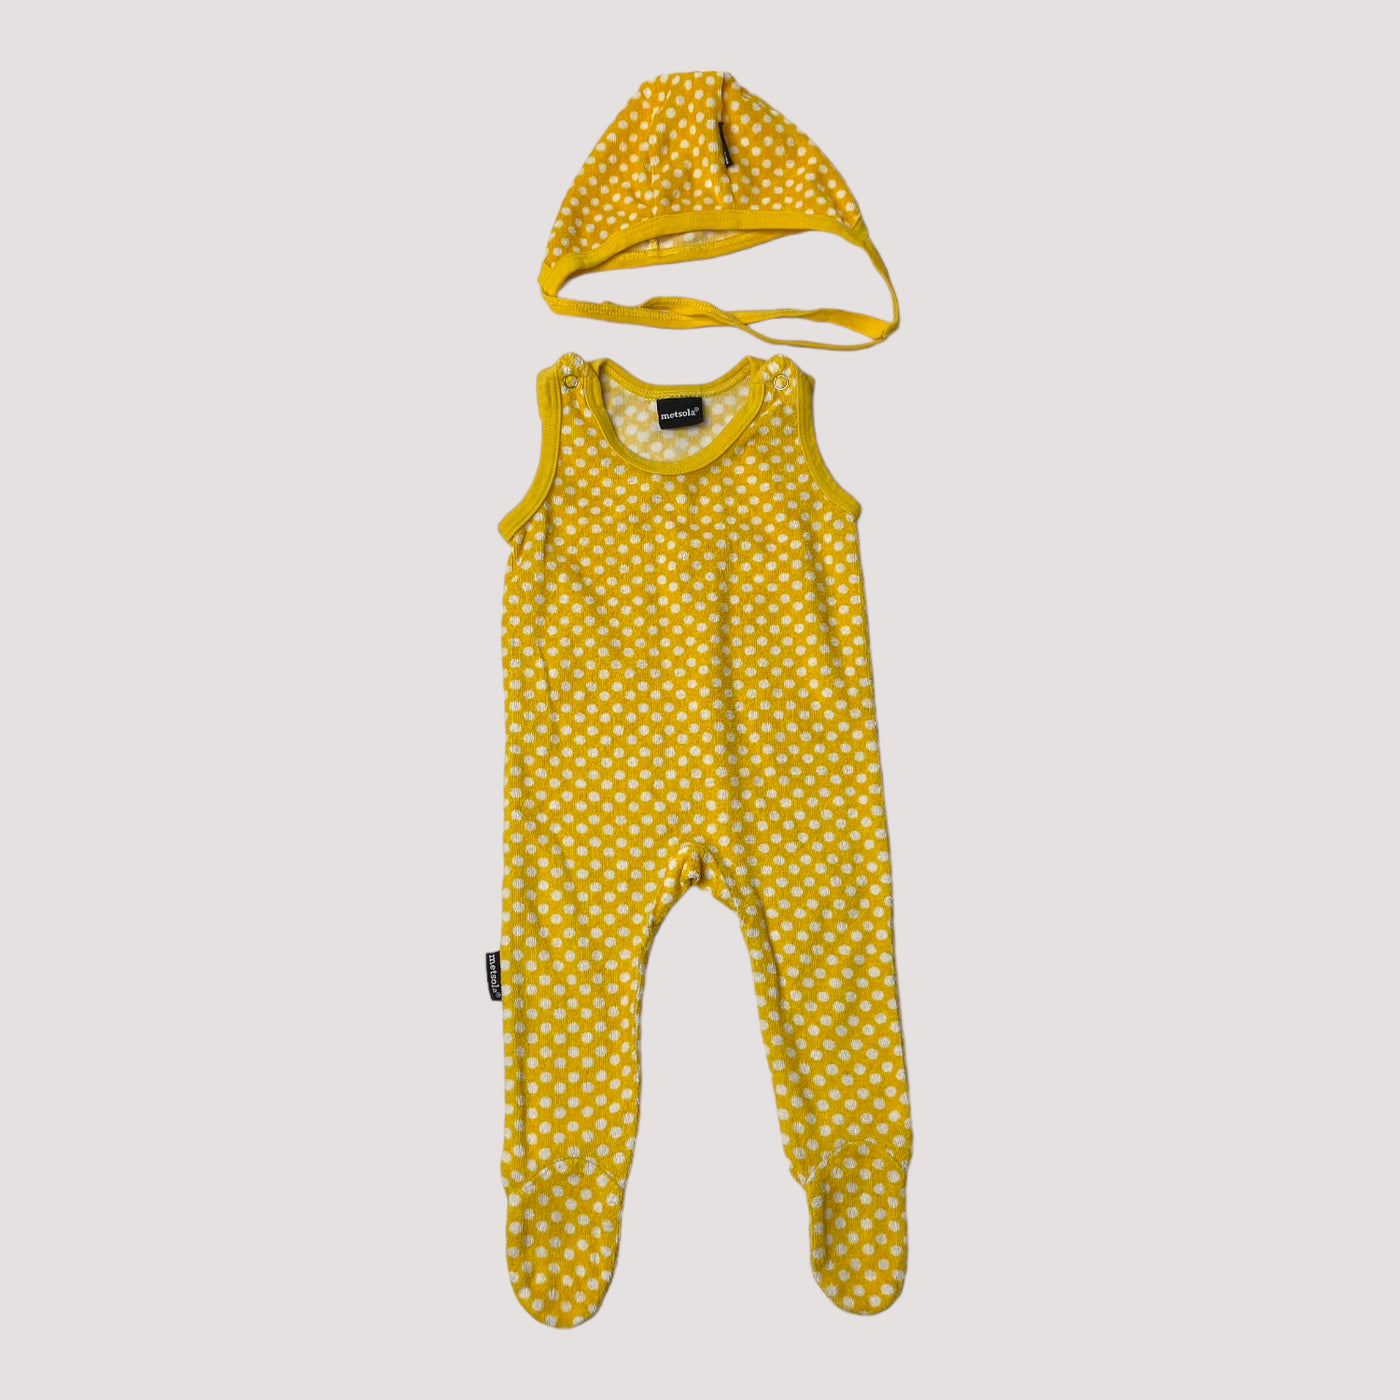 terry suit with hat, polkadot | 62cm